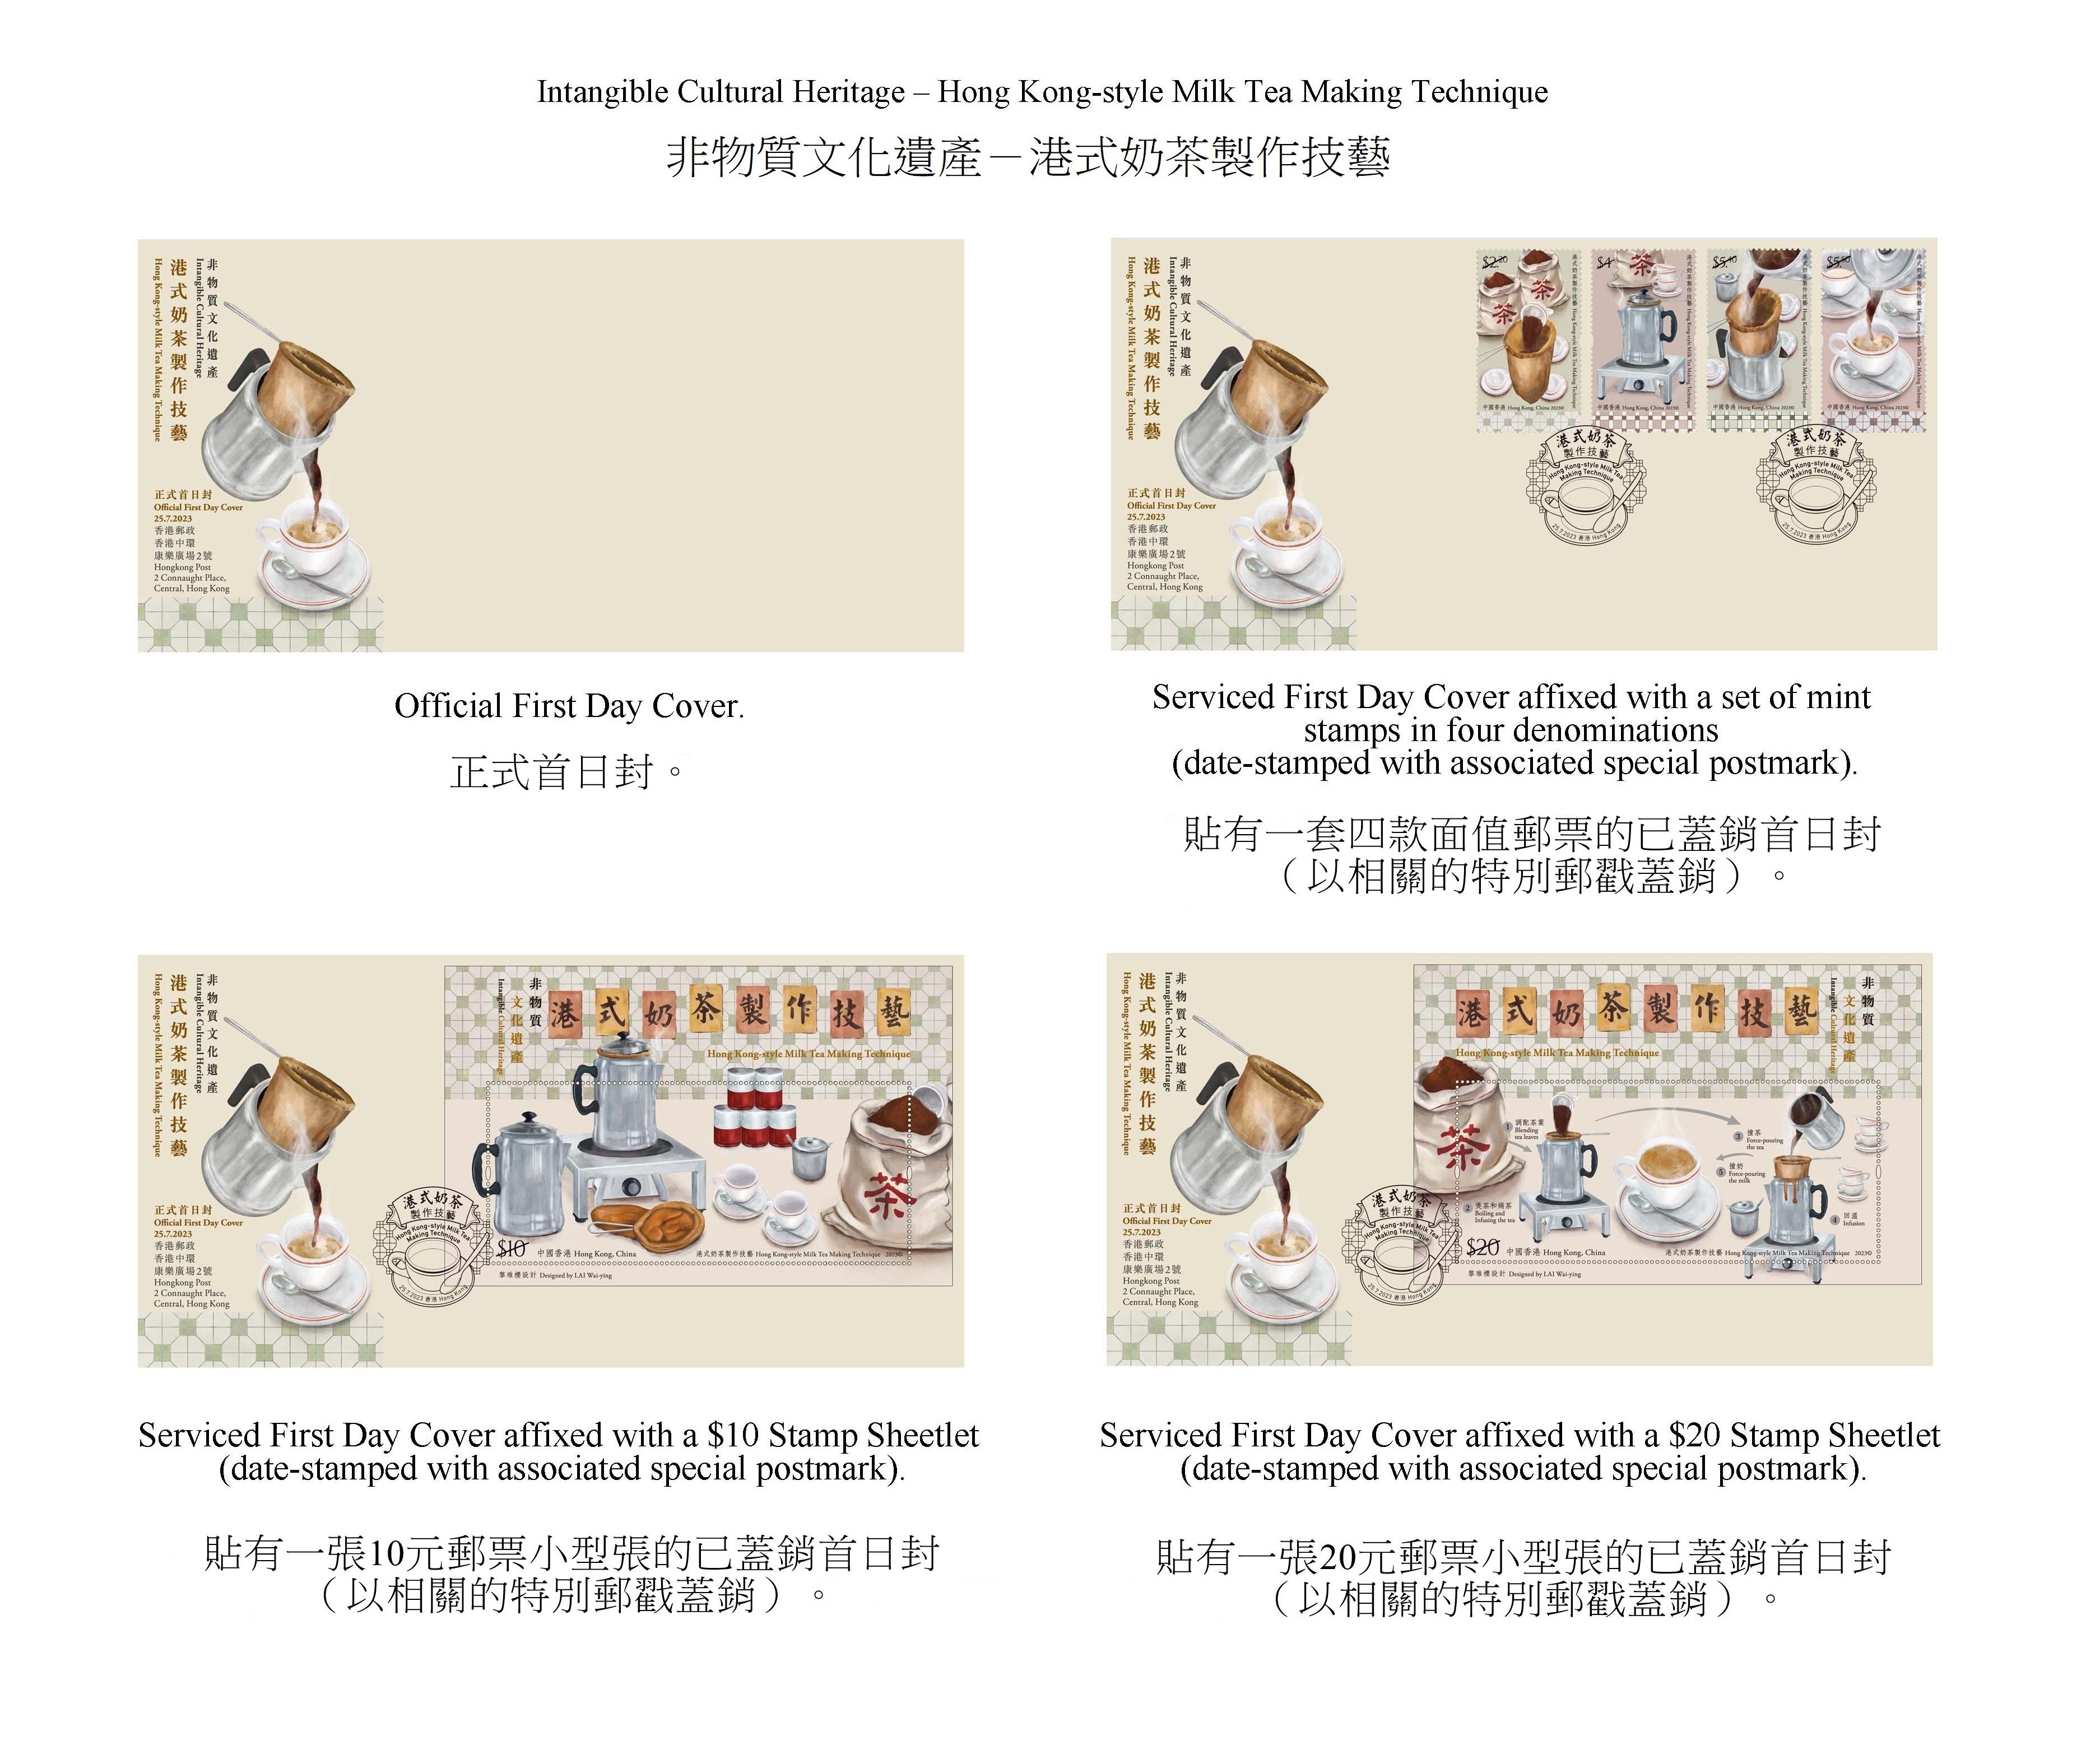 Hongkong Post will launch a special stamp issue and associated philatelic products on the theme of "Intangible Cultural Heritage - Hong Kong-style Milk Tea Making Technique" on July 25 (Tuesday). Photos show the first day covers.

